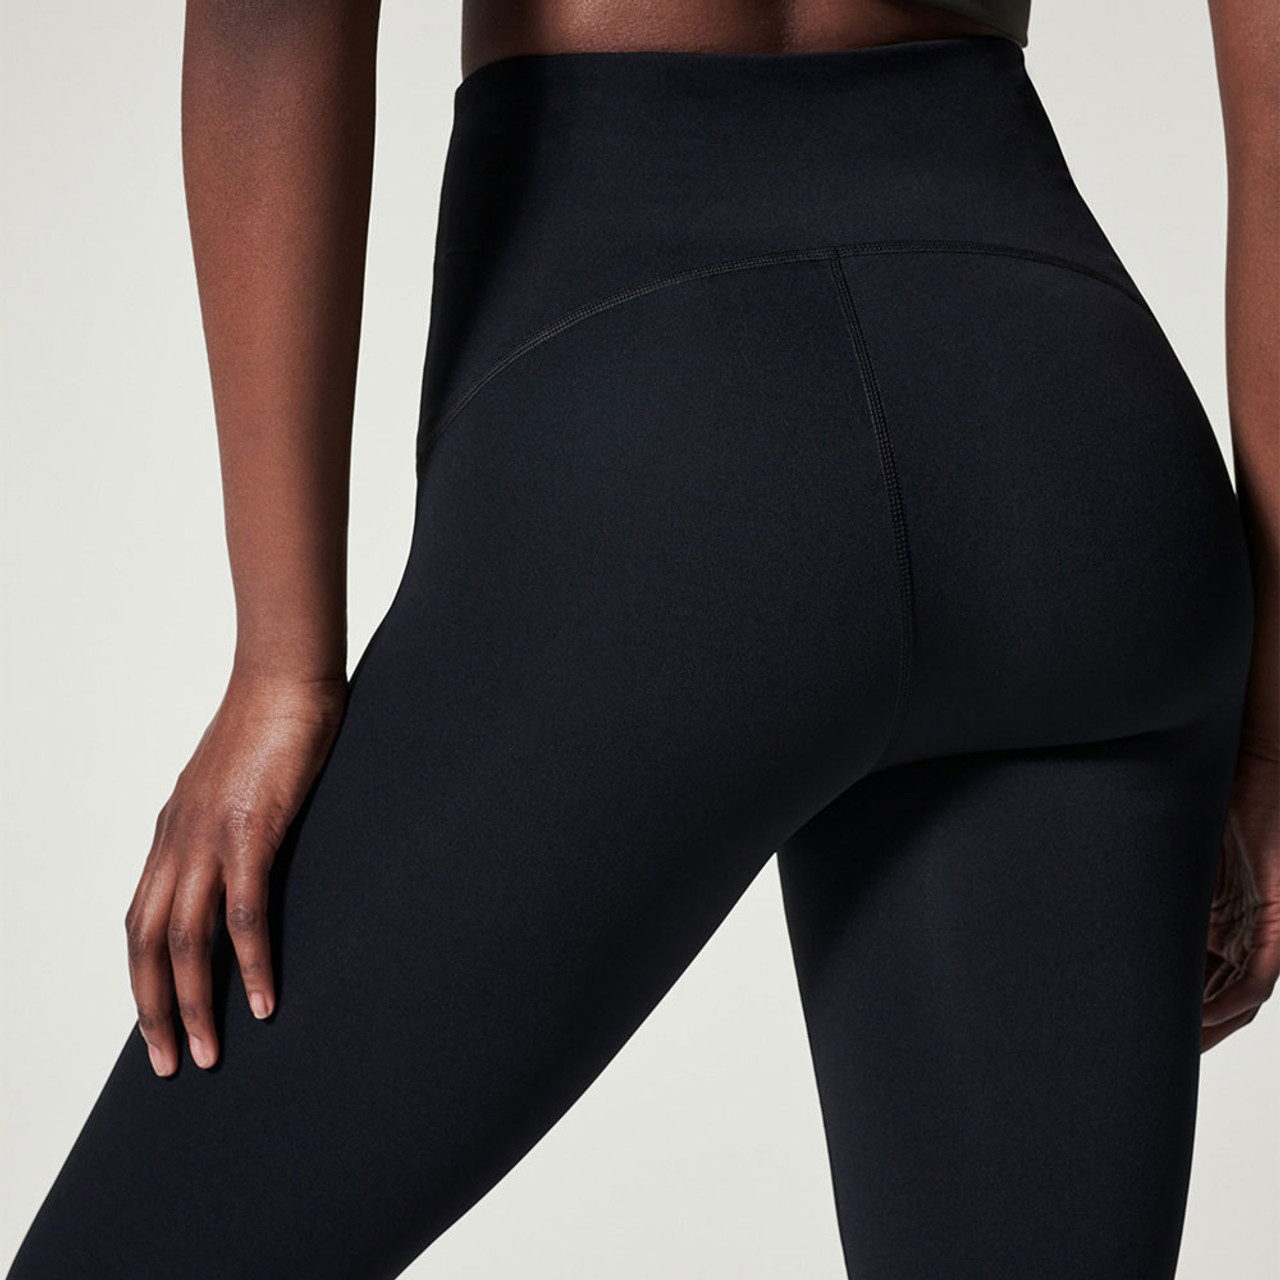 https://cdn11.bigcommerce.com/s-zut1msomd6/images/stencil/1280x1280/products/43152/249177/spanx-womens-booty-boost-flare-yoga-pant-50243r-vrybl-very-black-back-detail__44200.1709224998.jpg?c=1